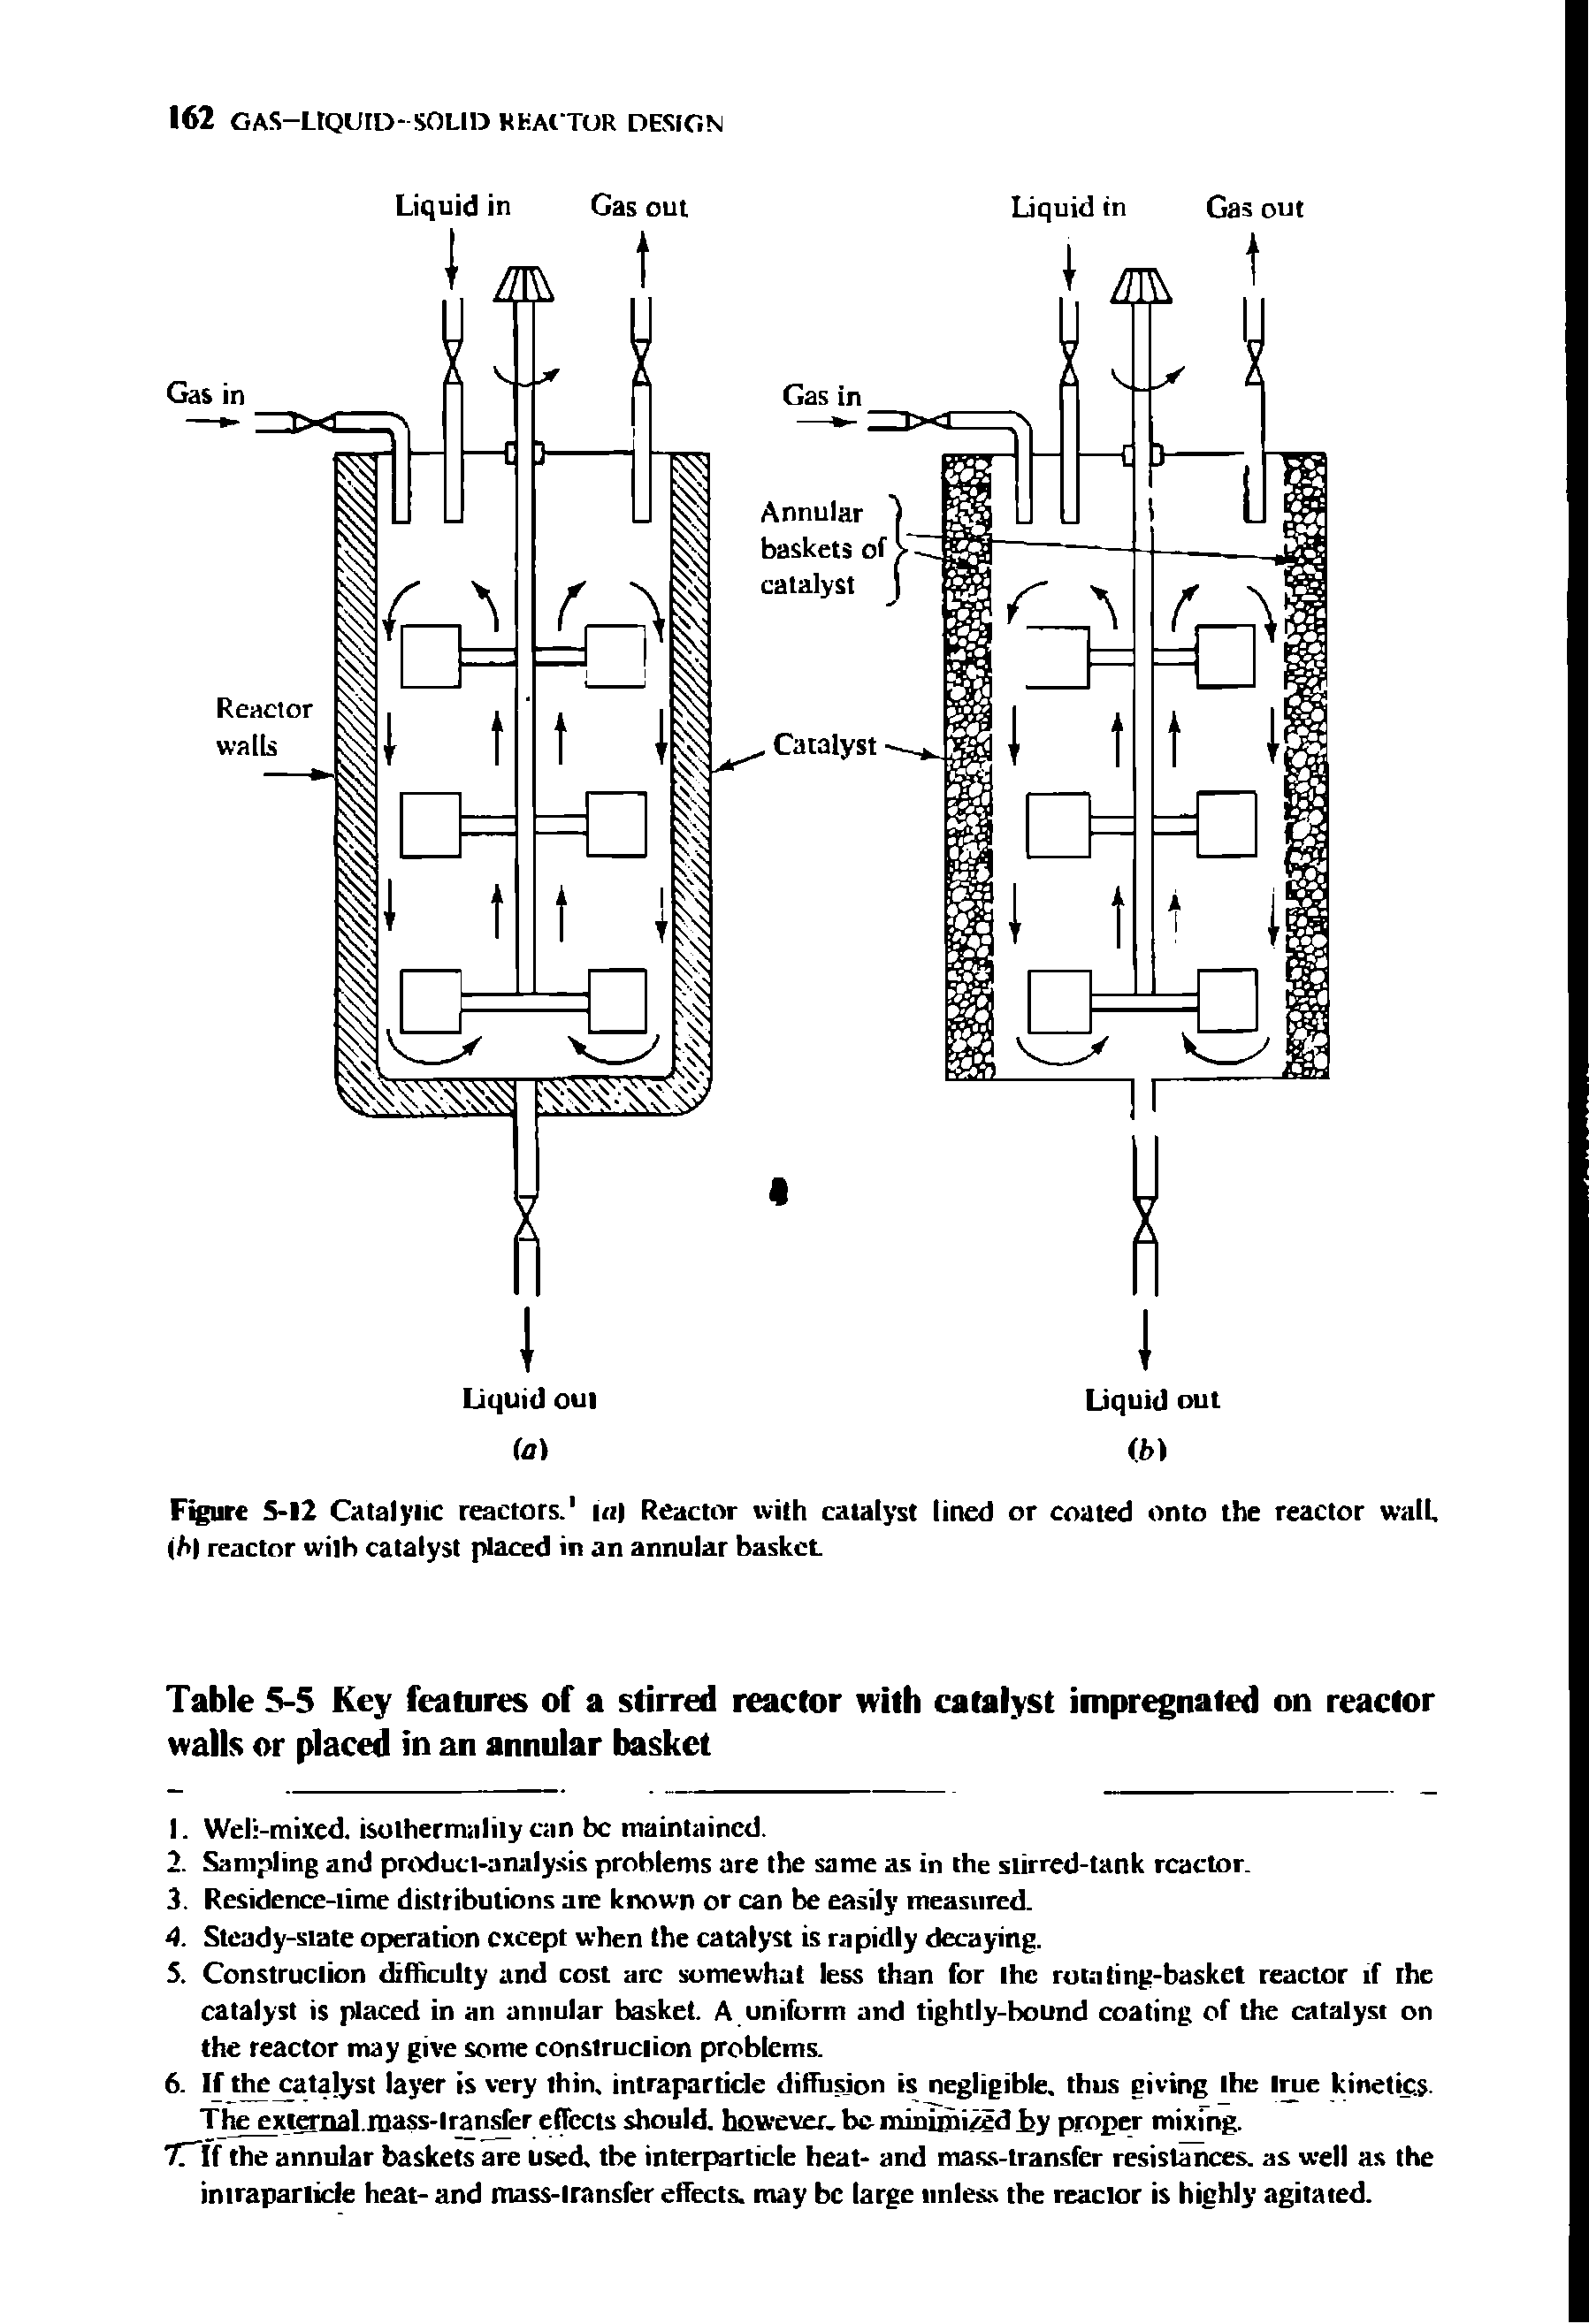 Table 5-5 Key features of a stirred reactor with catalyst impregnated on reactor walls or placed in an annular basket...